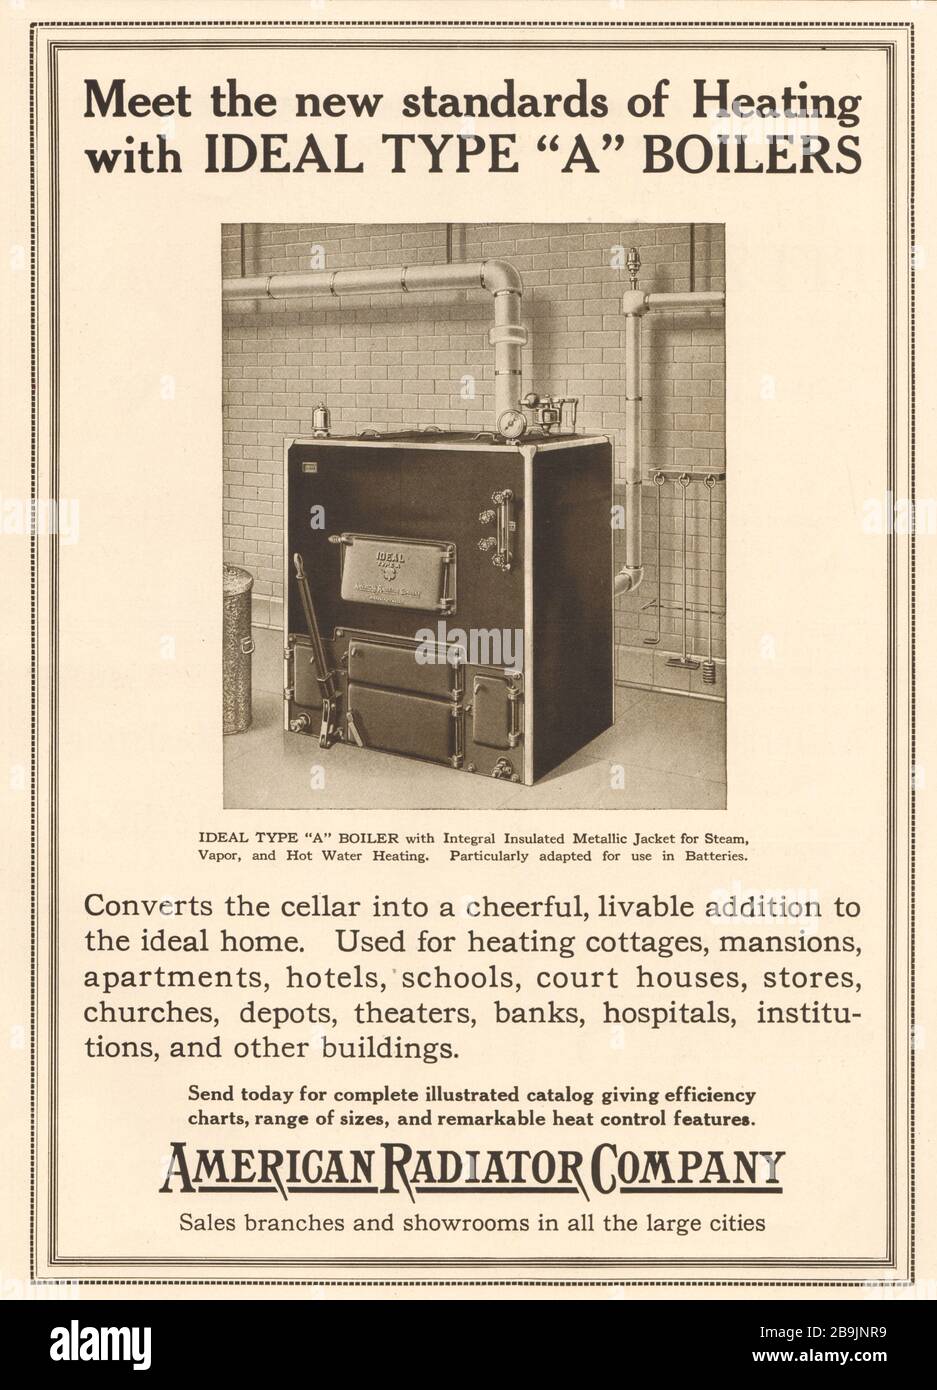 Meet the new standards of heating with ideal type ''A'' boilers. American Radiator Company (1919) Stock Photo